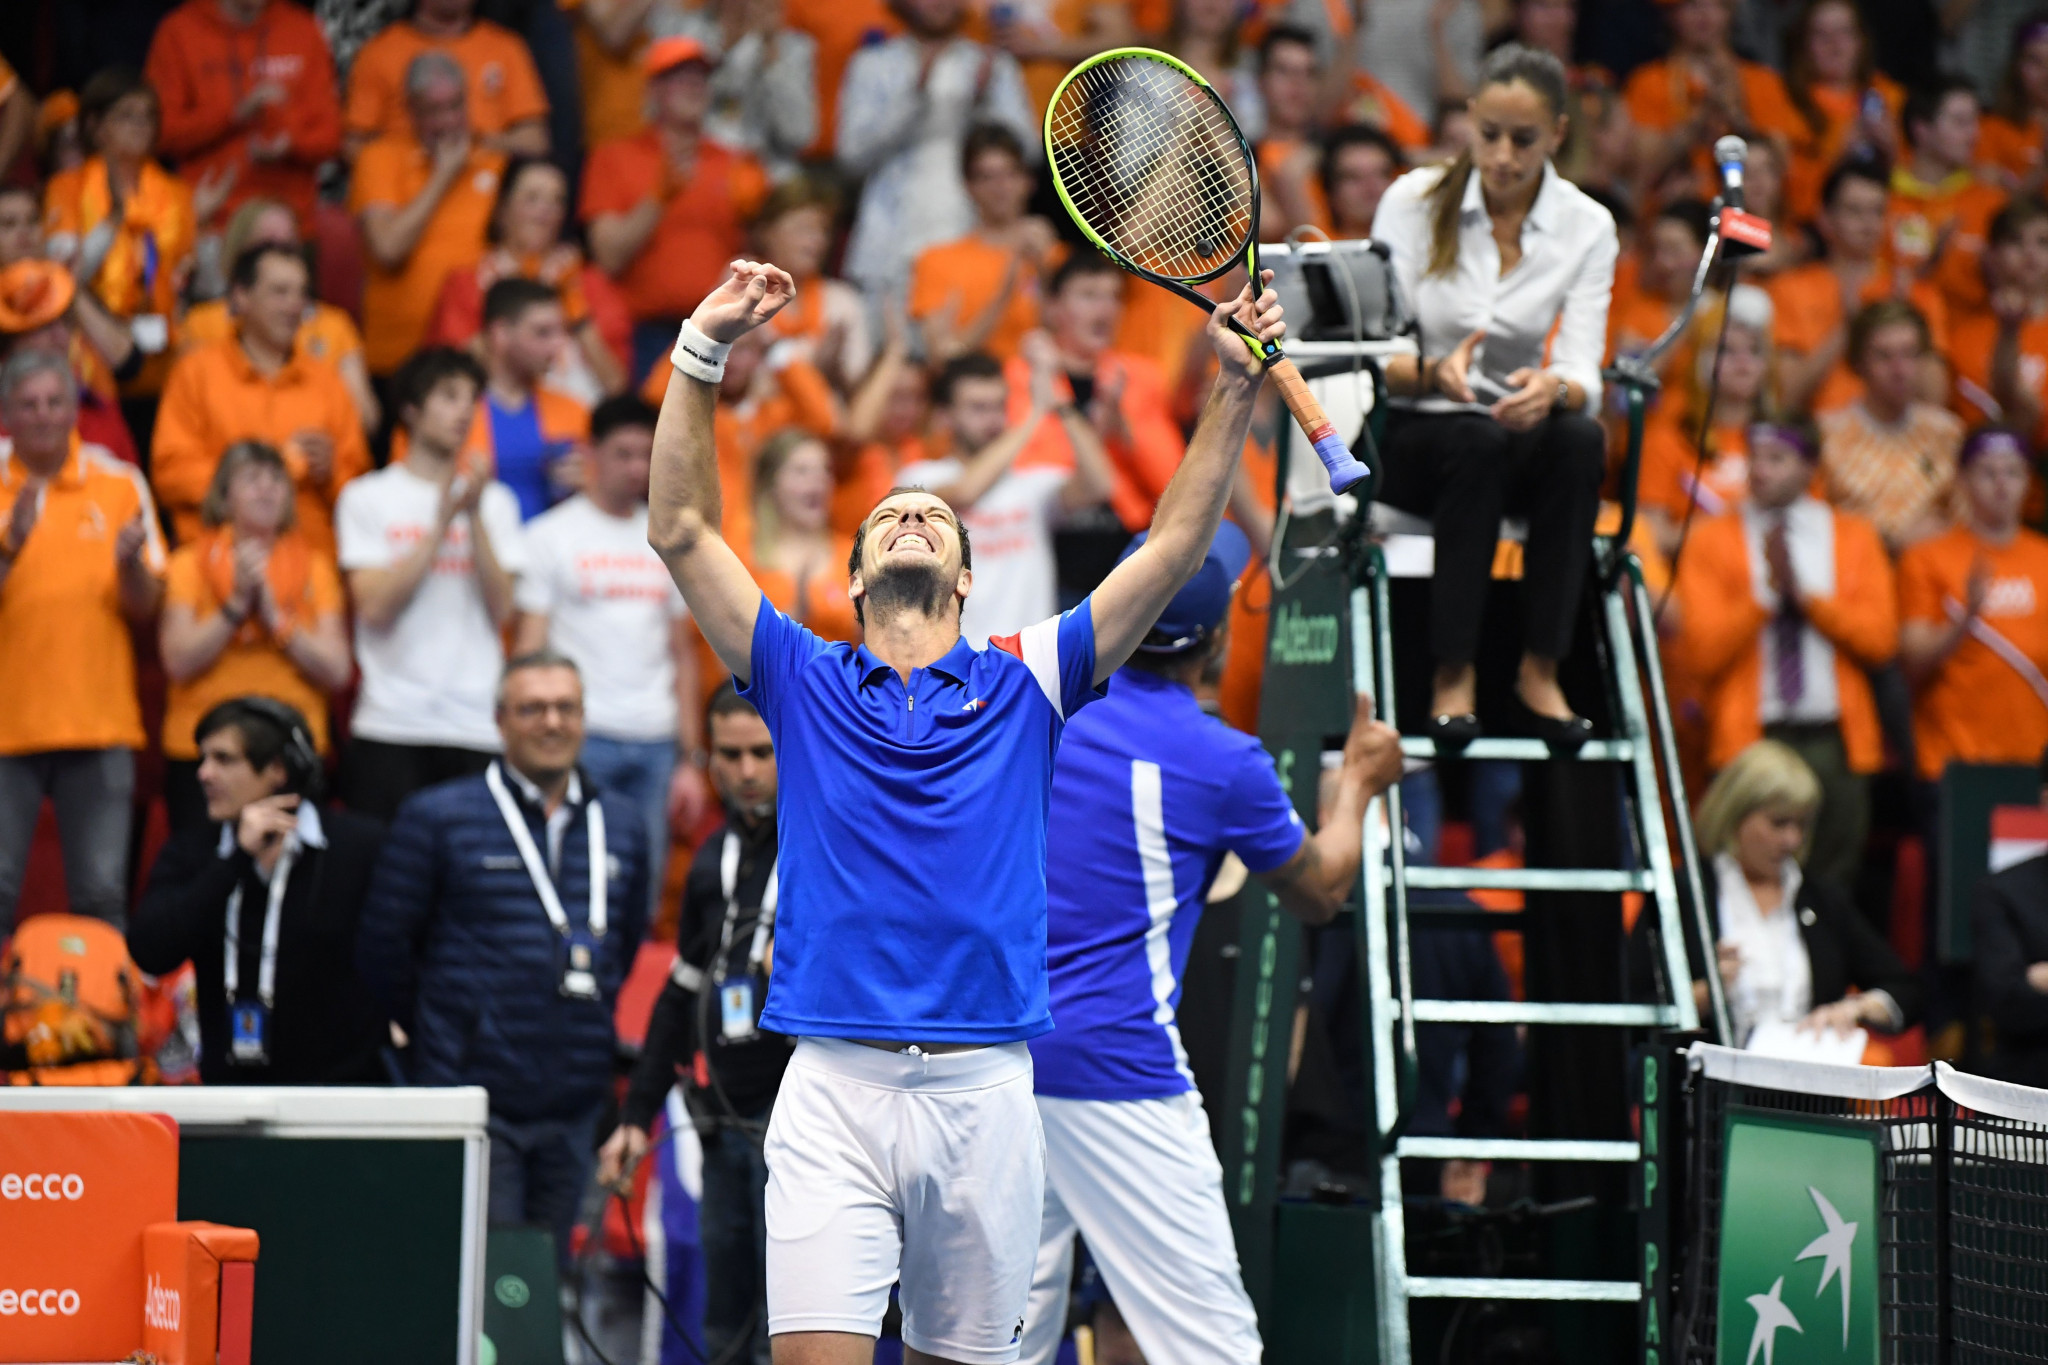 Defending champions France level with Netherlands after first day of Davis Cup World Group tie